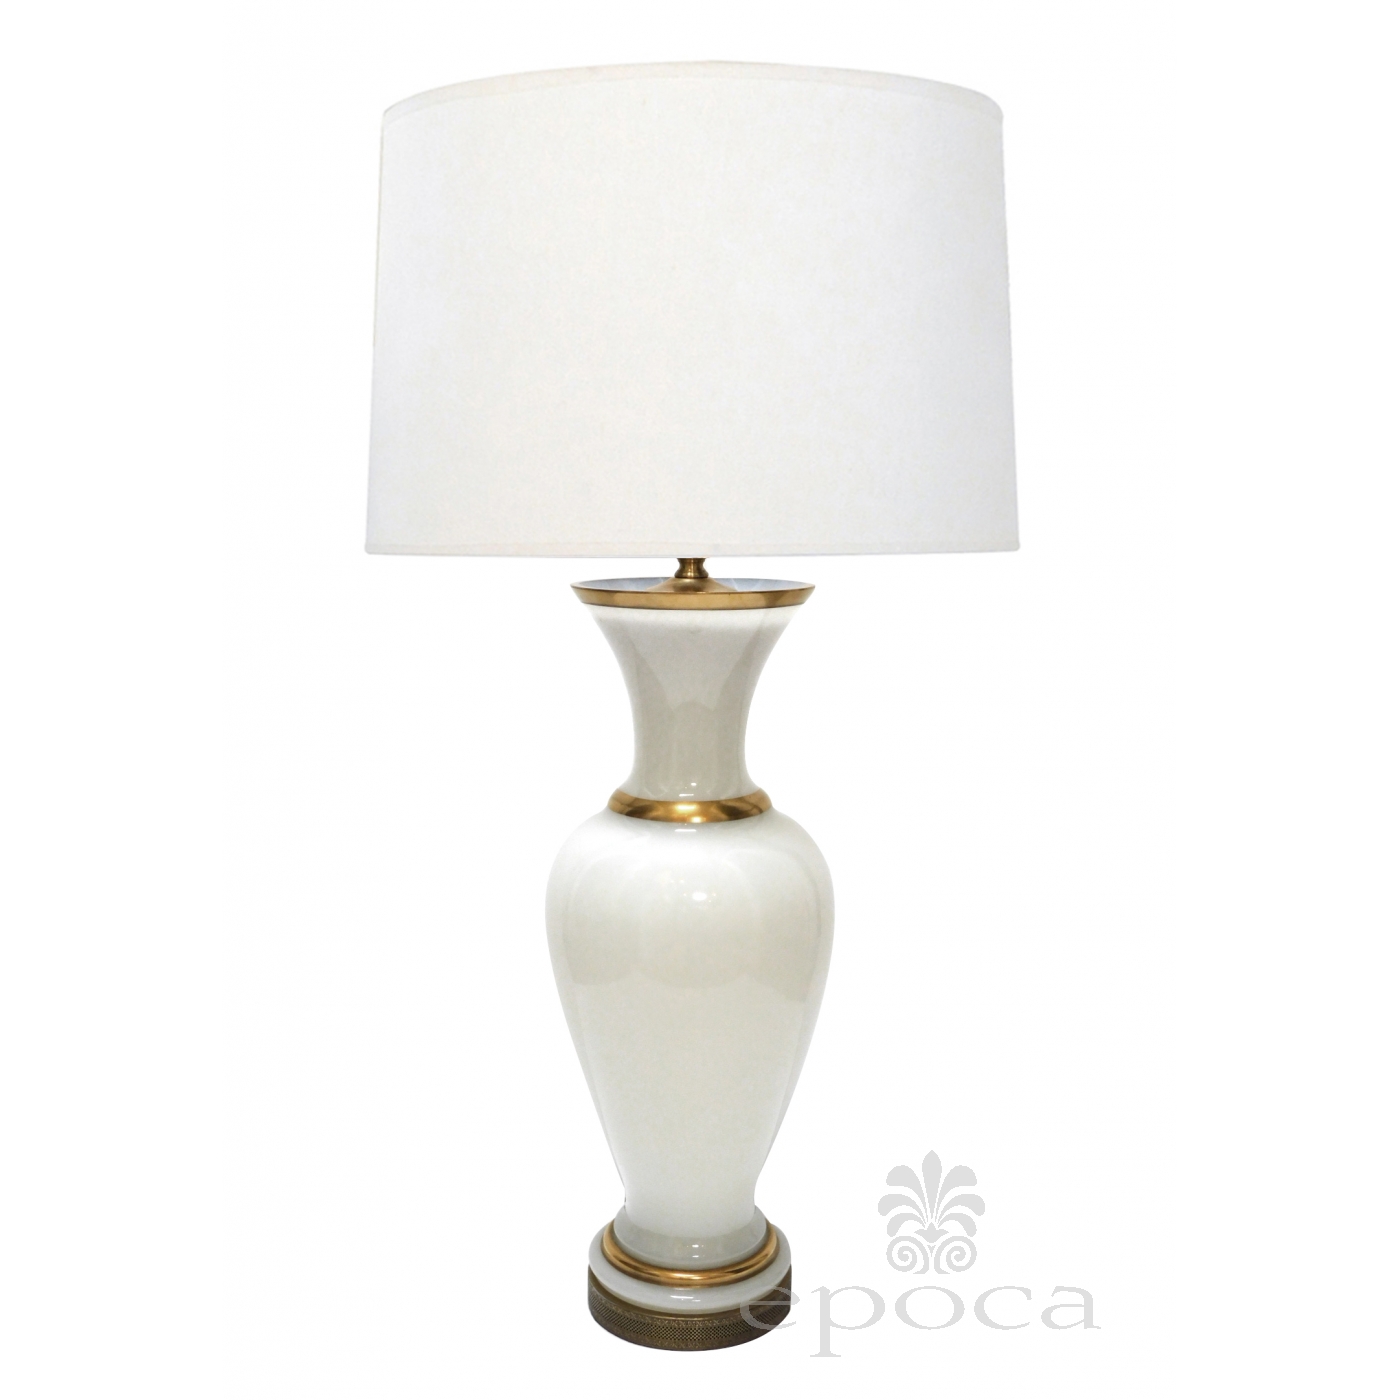 Vallen genie verwijzen A Large French 1960's White Opaline Glass Lamp with Gilt Highlights epoca  antiques & 20th century furnishings san francisco